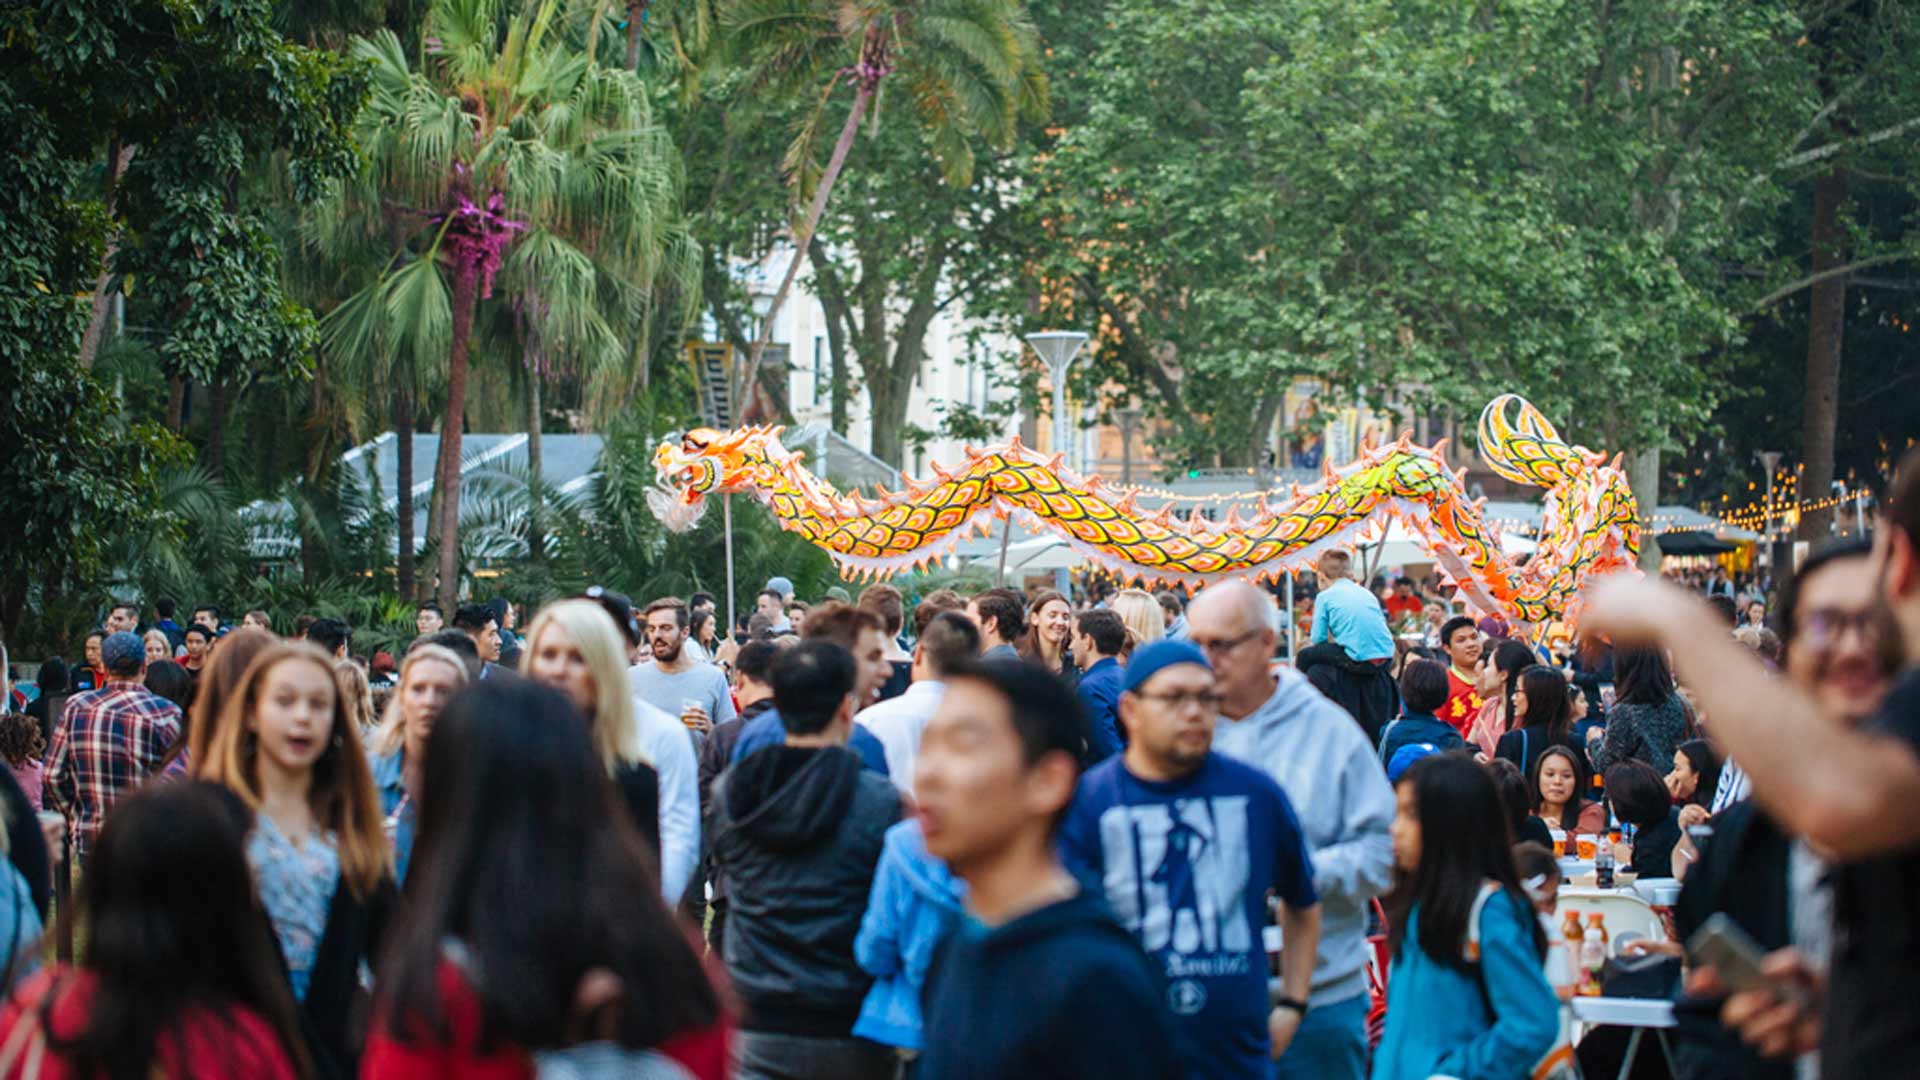 Sydney's Huge Outdoor Night Noodle Markets Are Back for 2019